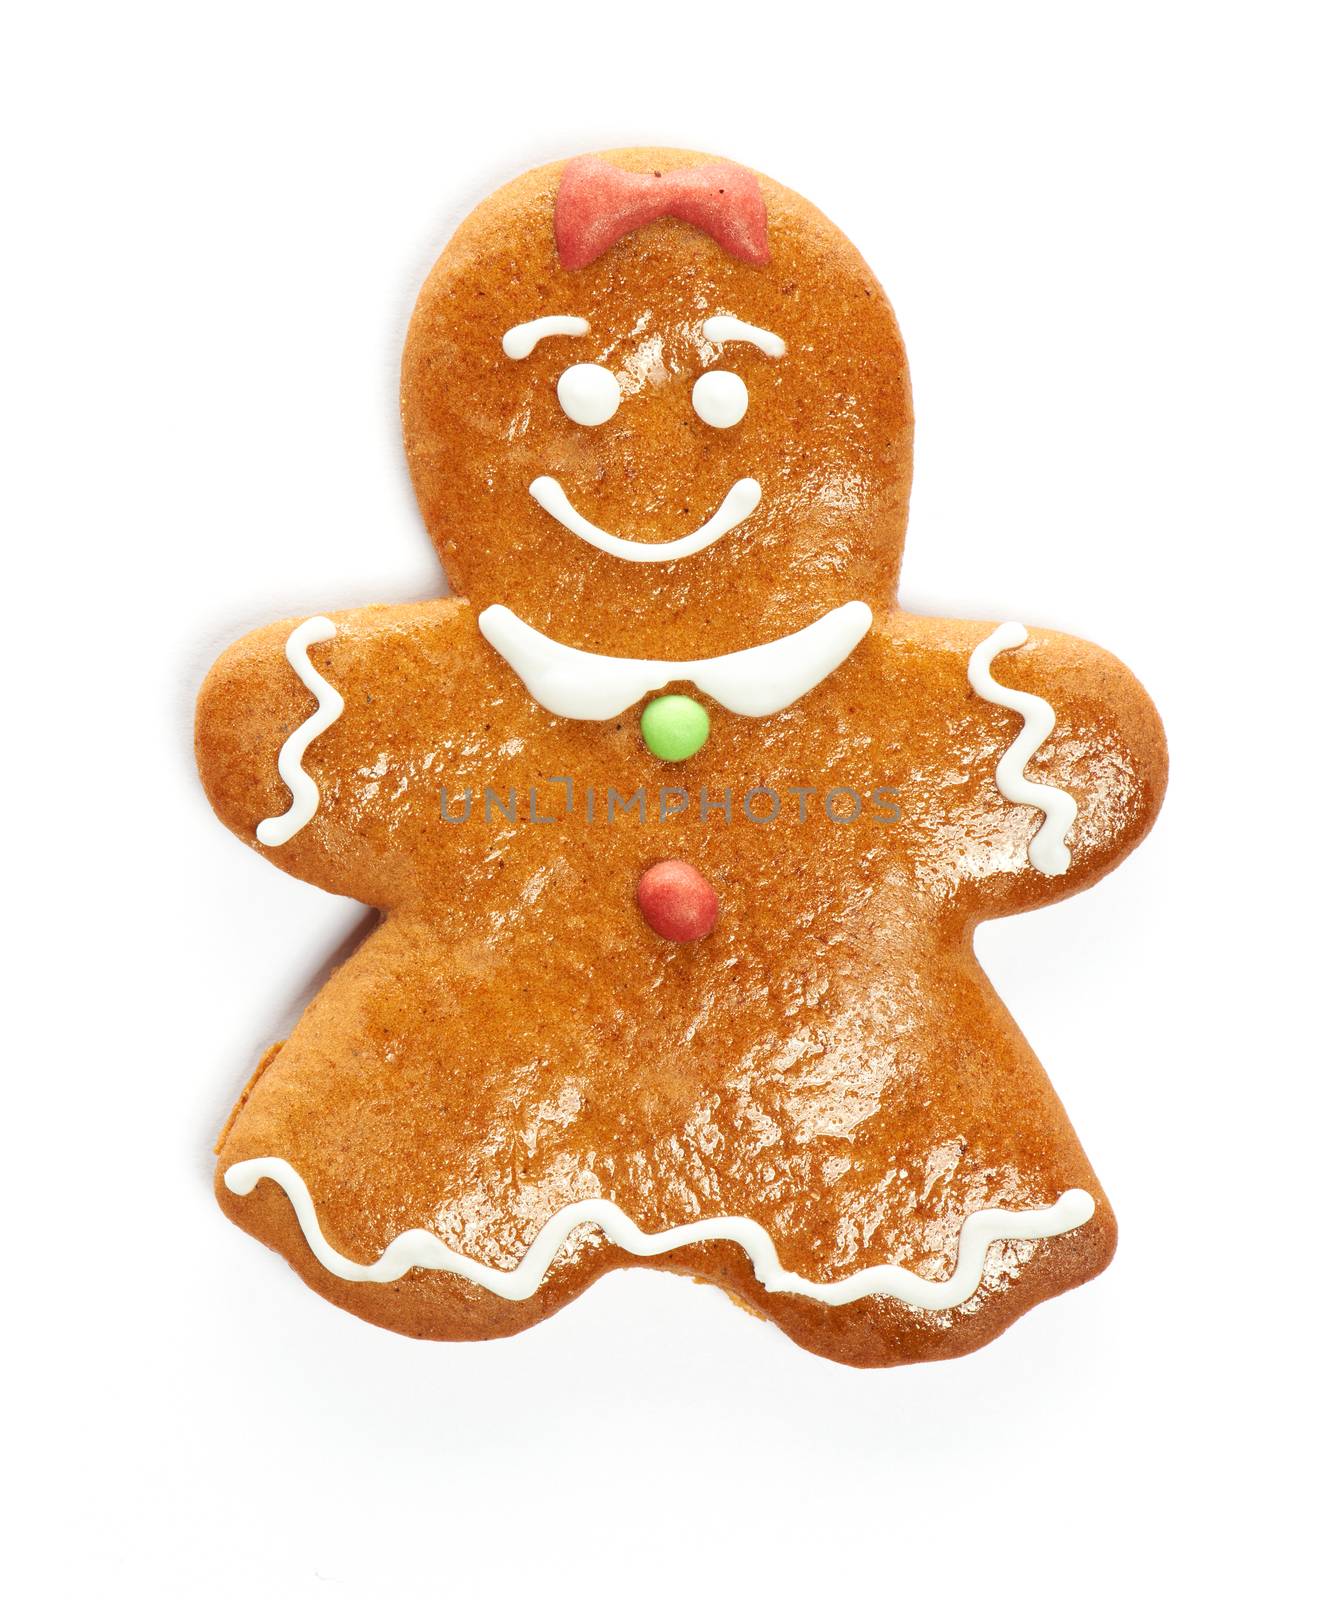 Christmas gingerbread girl cookie by haveseen